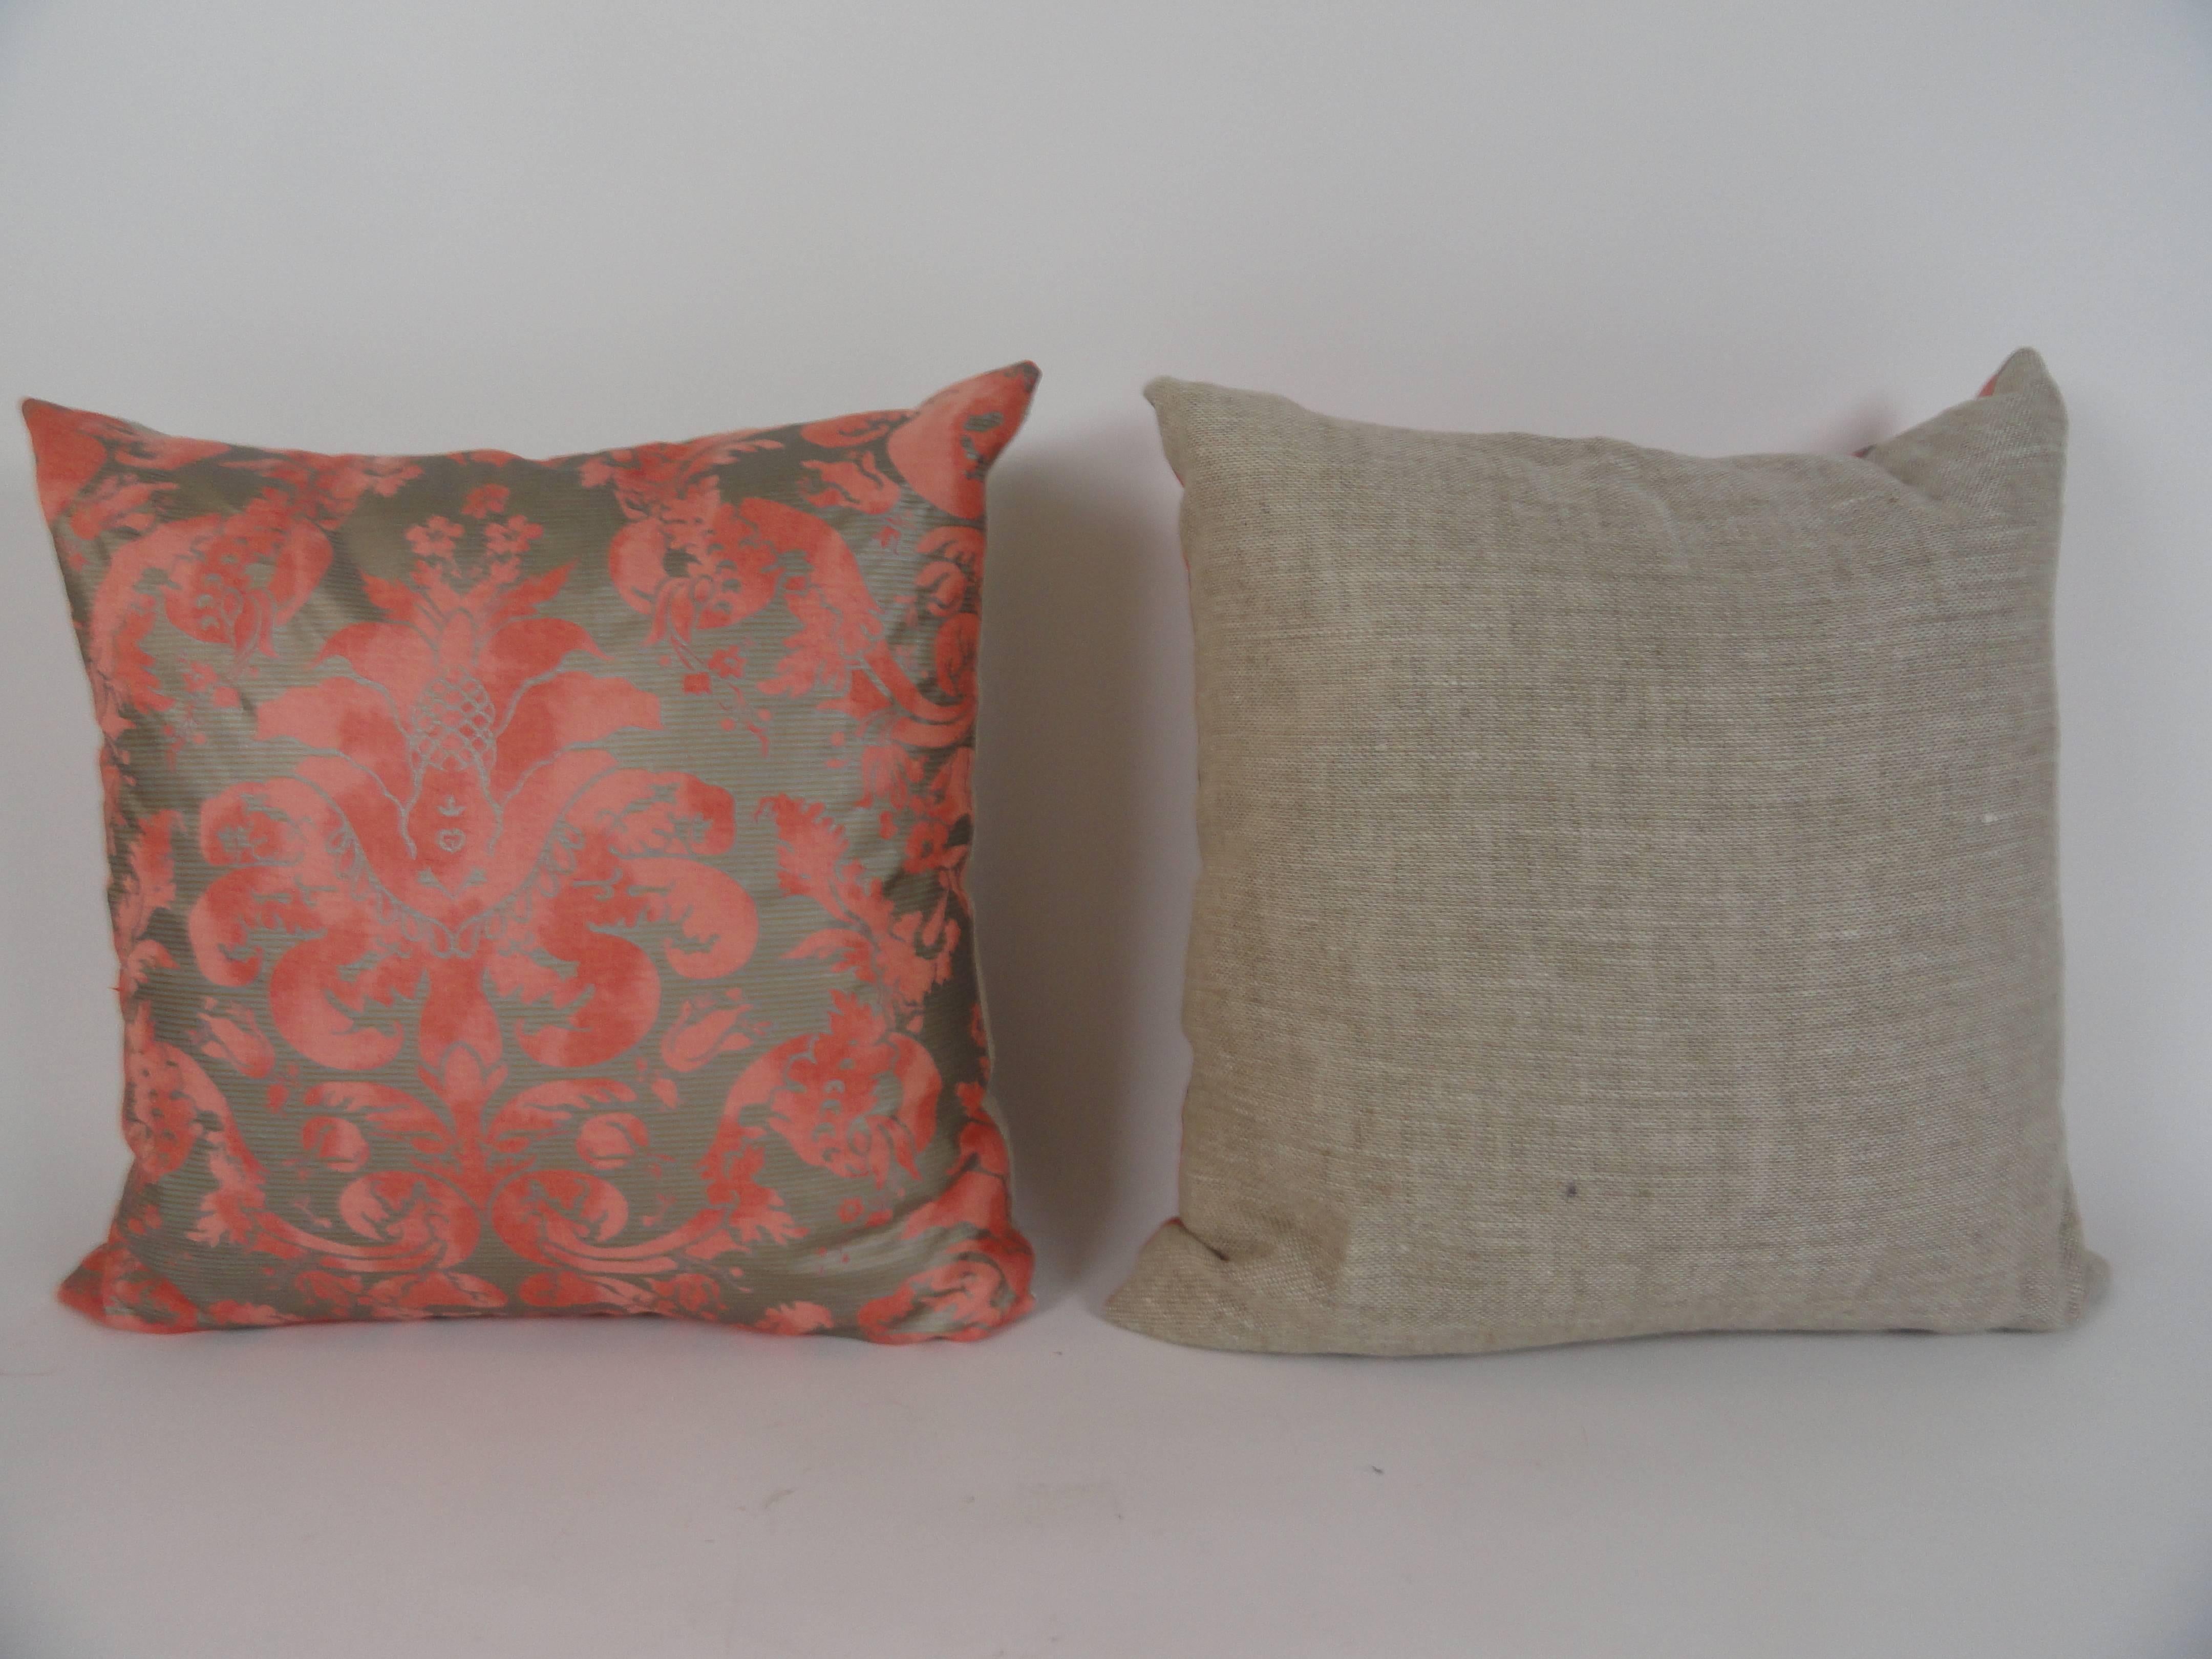 Pair of Italian cotton pillows in a Fortuny style pattern. Backed in Scalamandre linen. 24